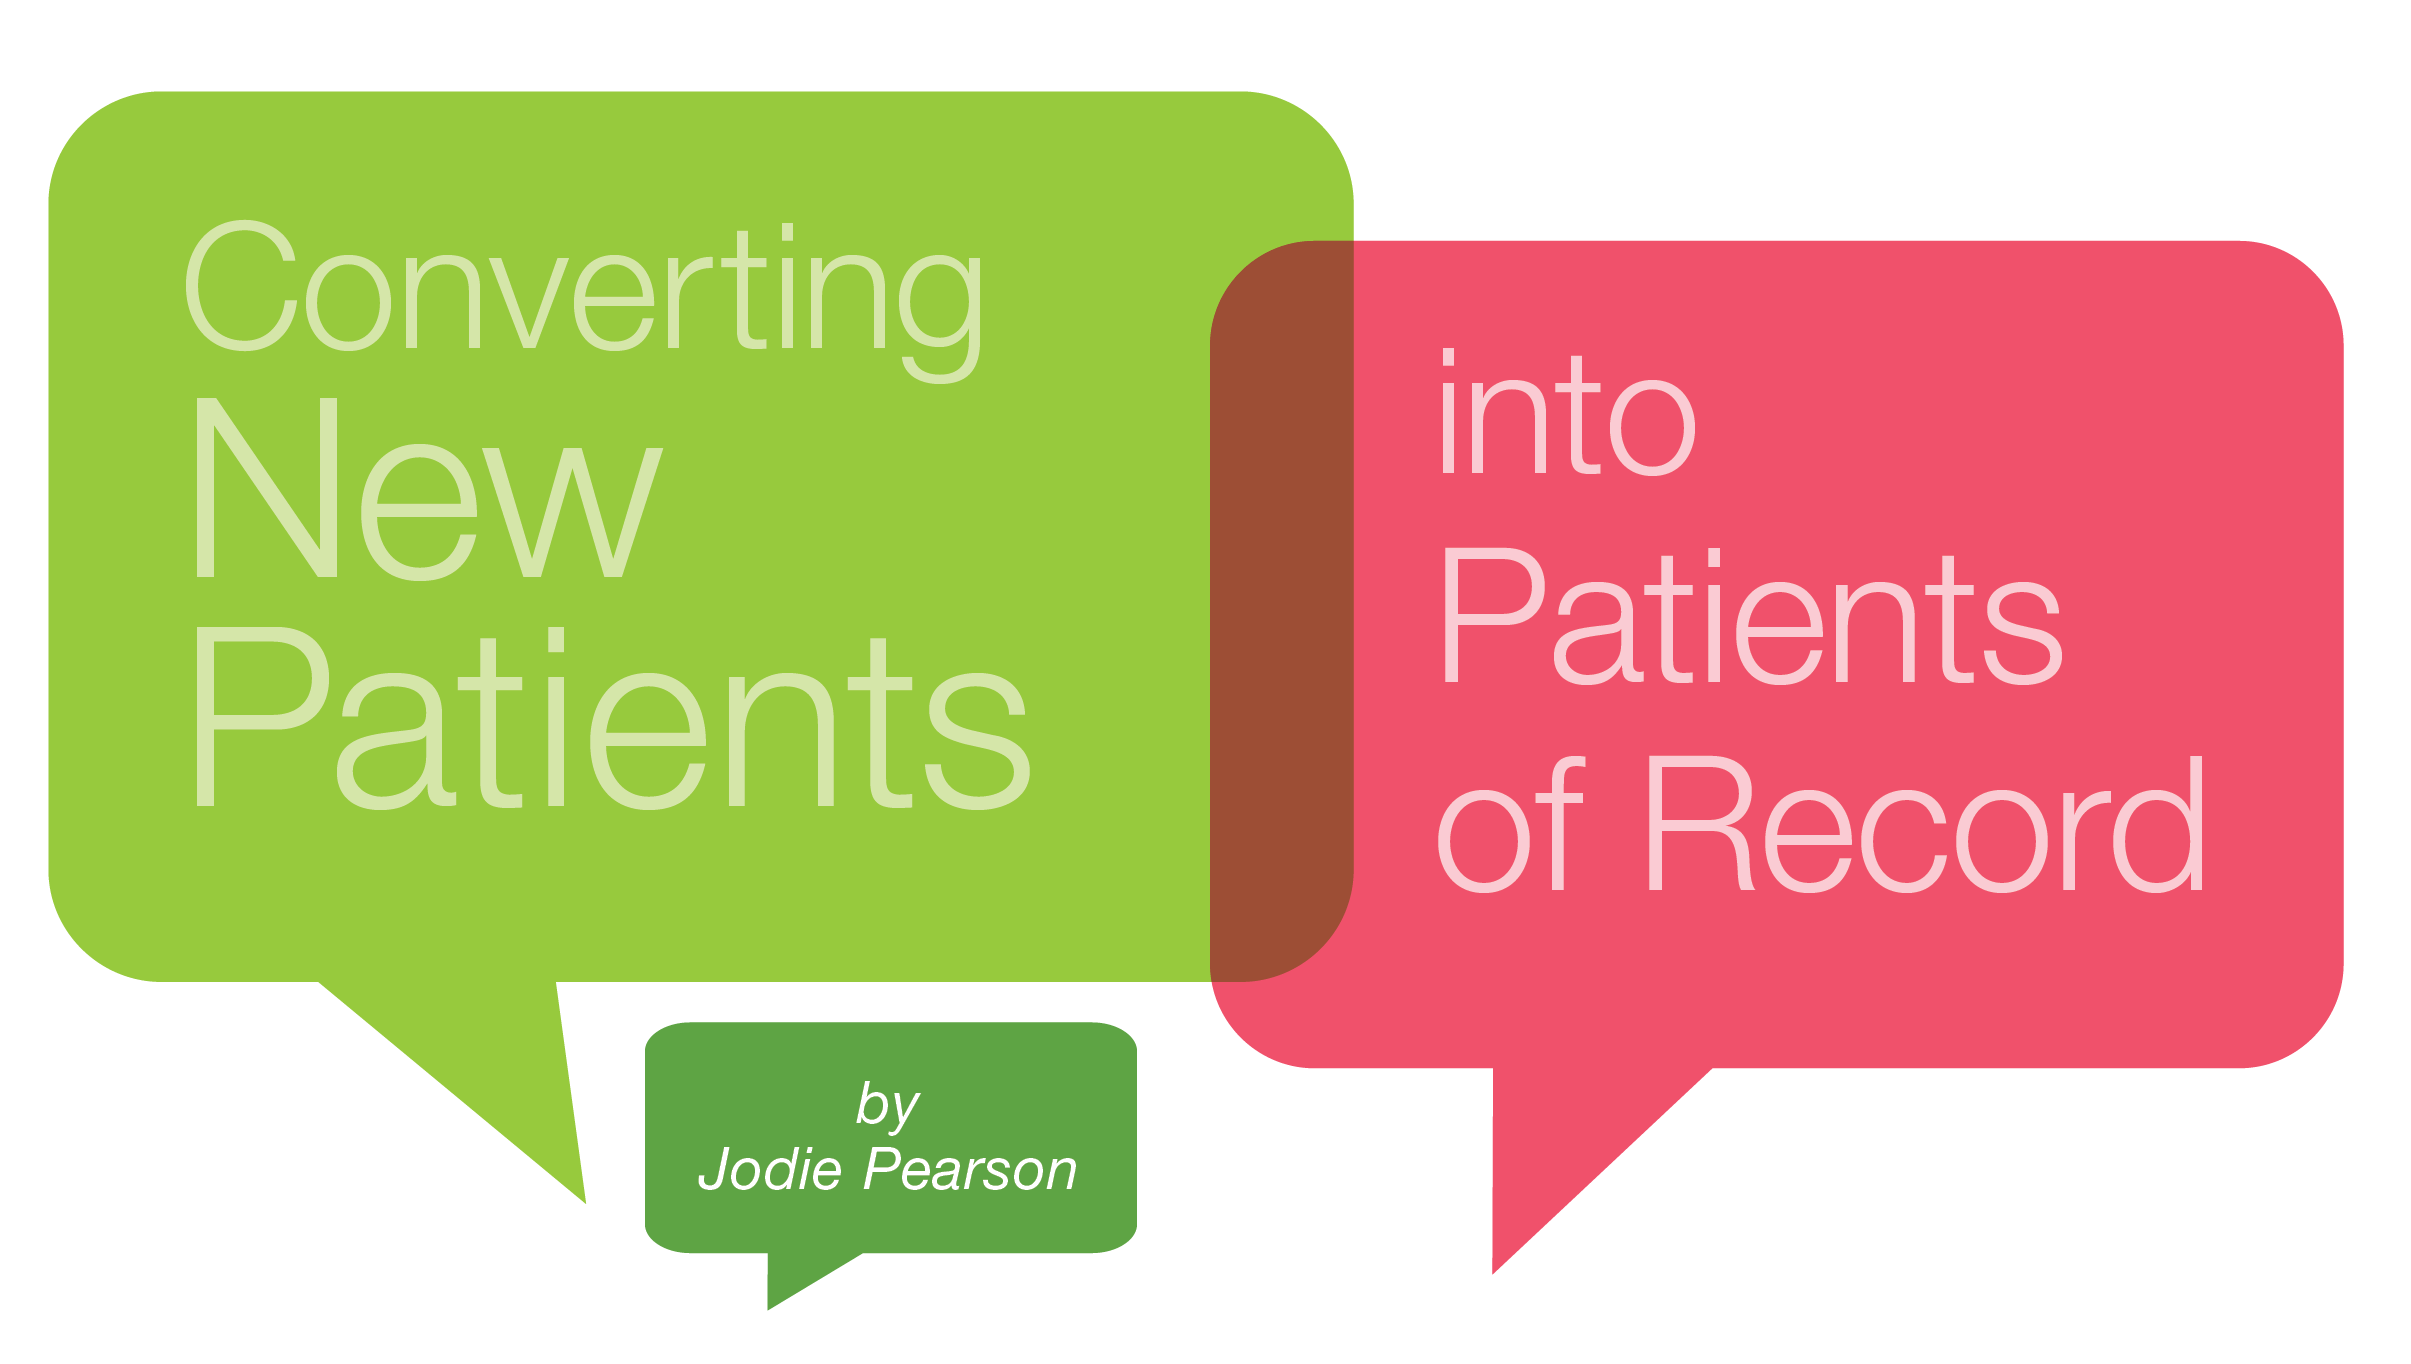 Trojan Today Classic | Jodie Pearson | Converting New Patients into Patients of Record